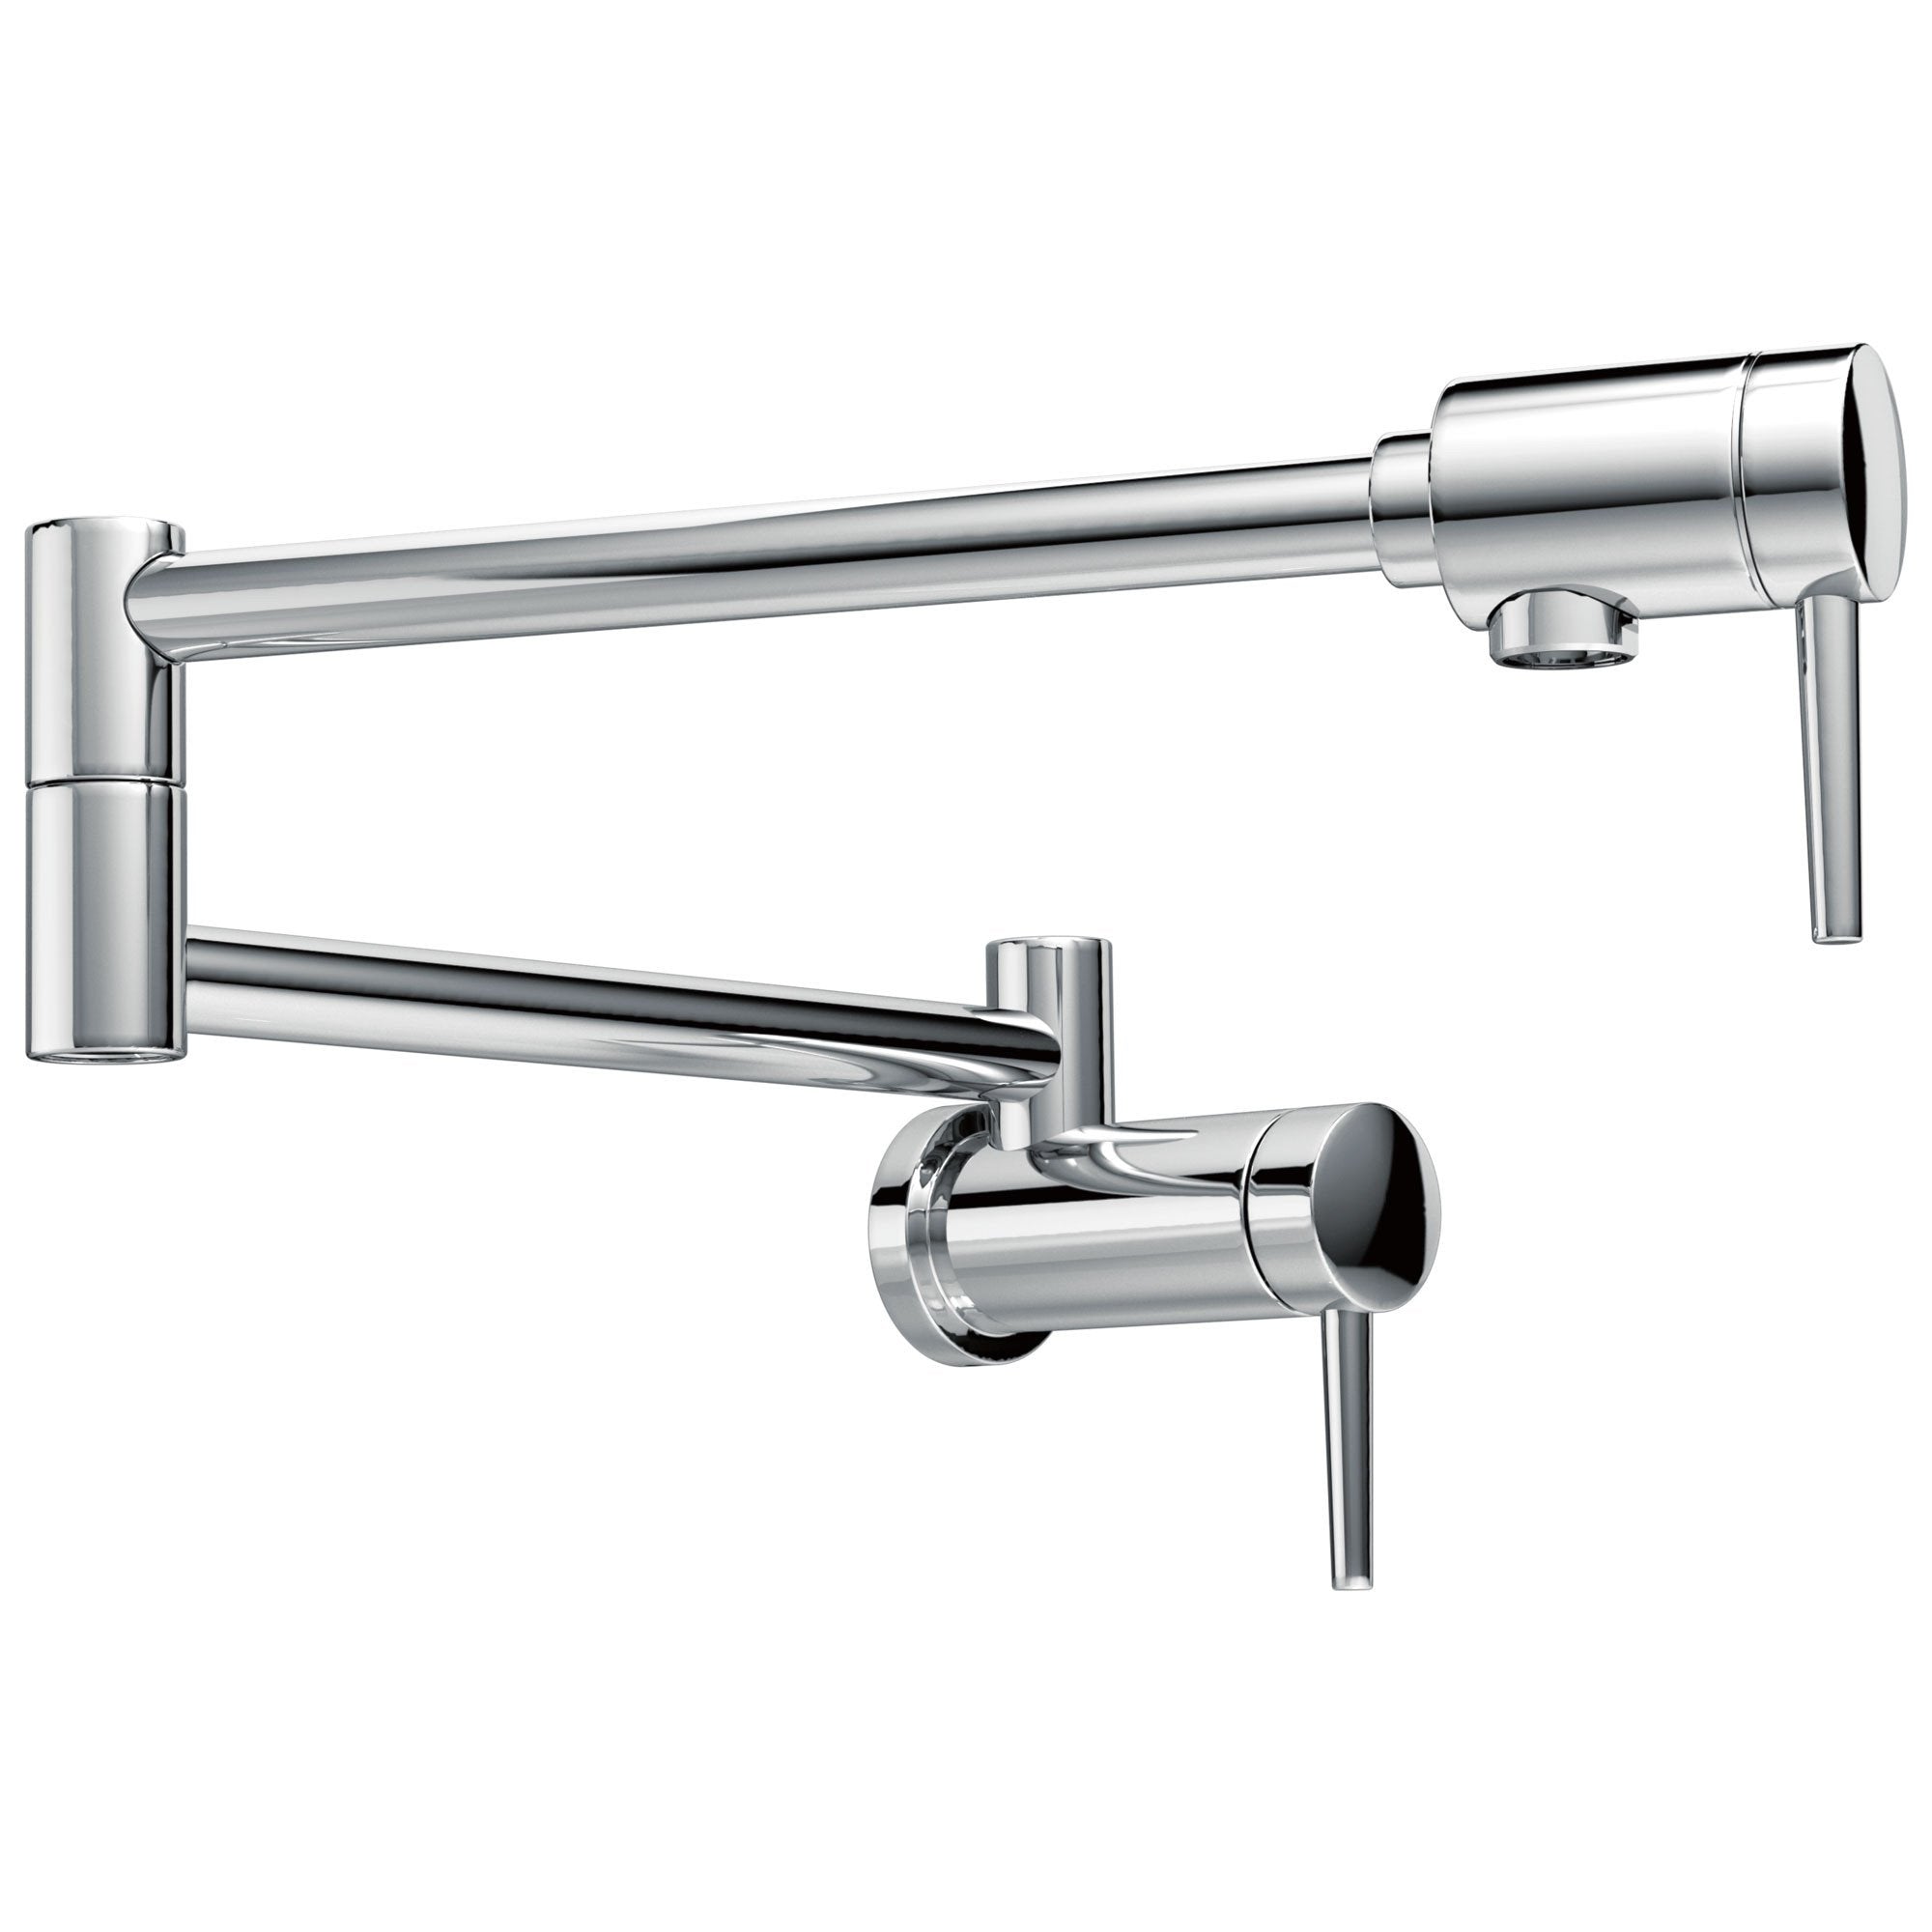 Delta Chrome Finish Contemporary Modern Style Wall Mounted 4 GPM High-Flow Double Articulated Pot Filler Faucet 732774